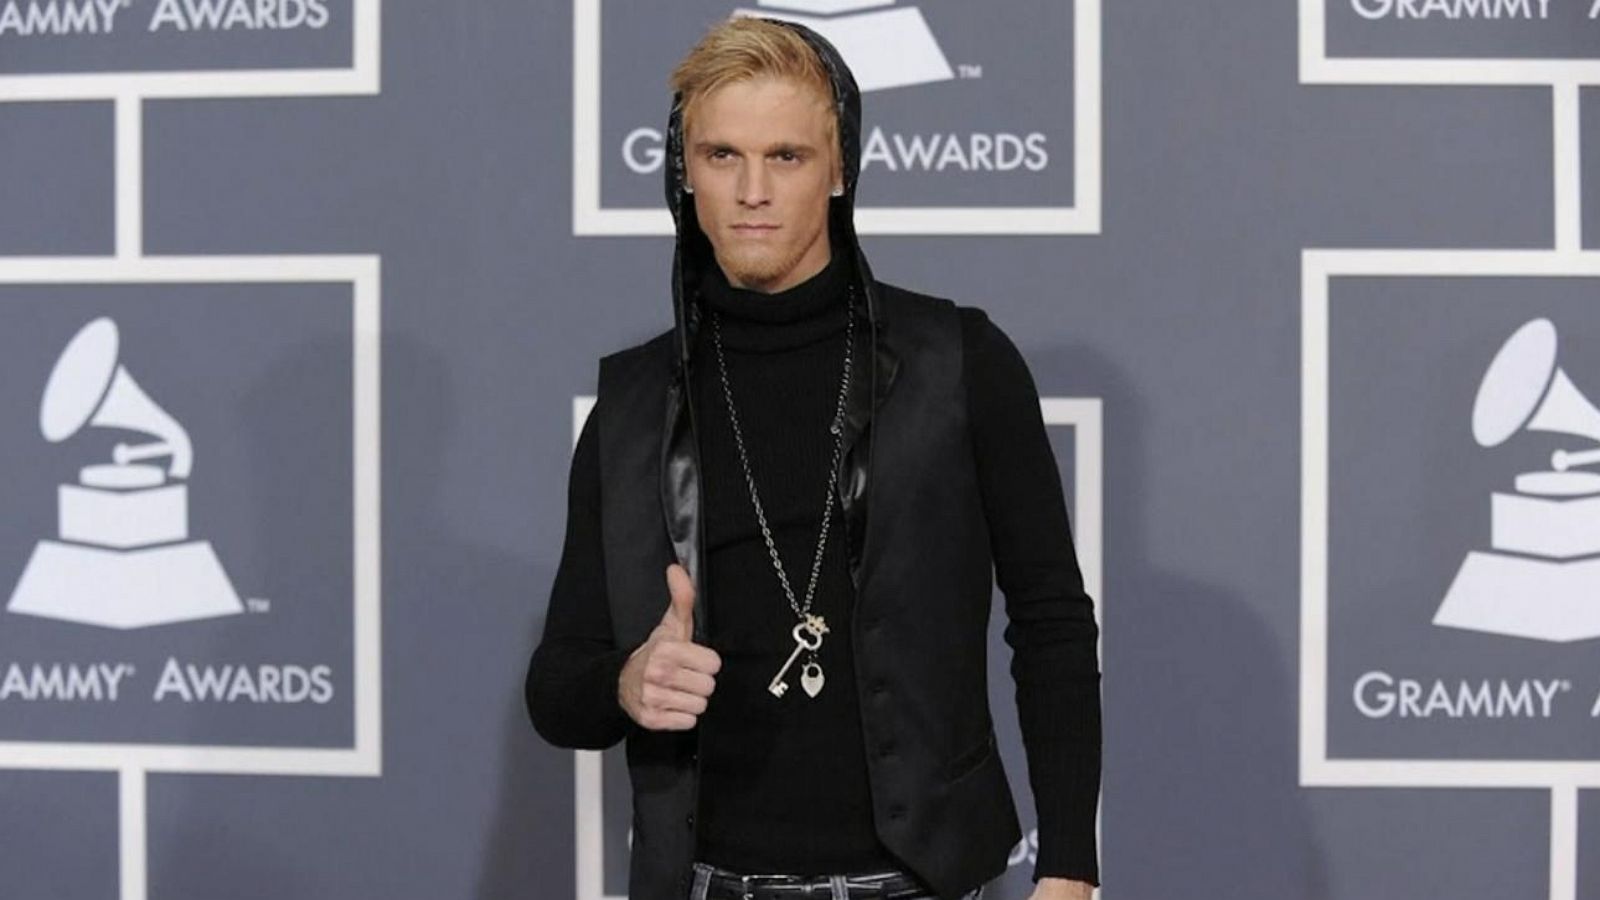 Singer Aaron Carter dead at the age of 34 - Good Morning America